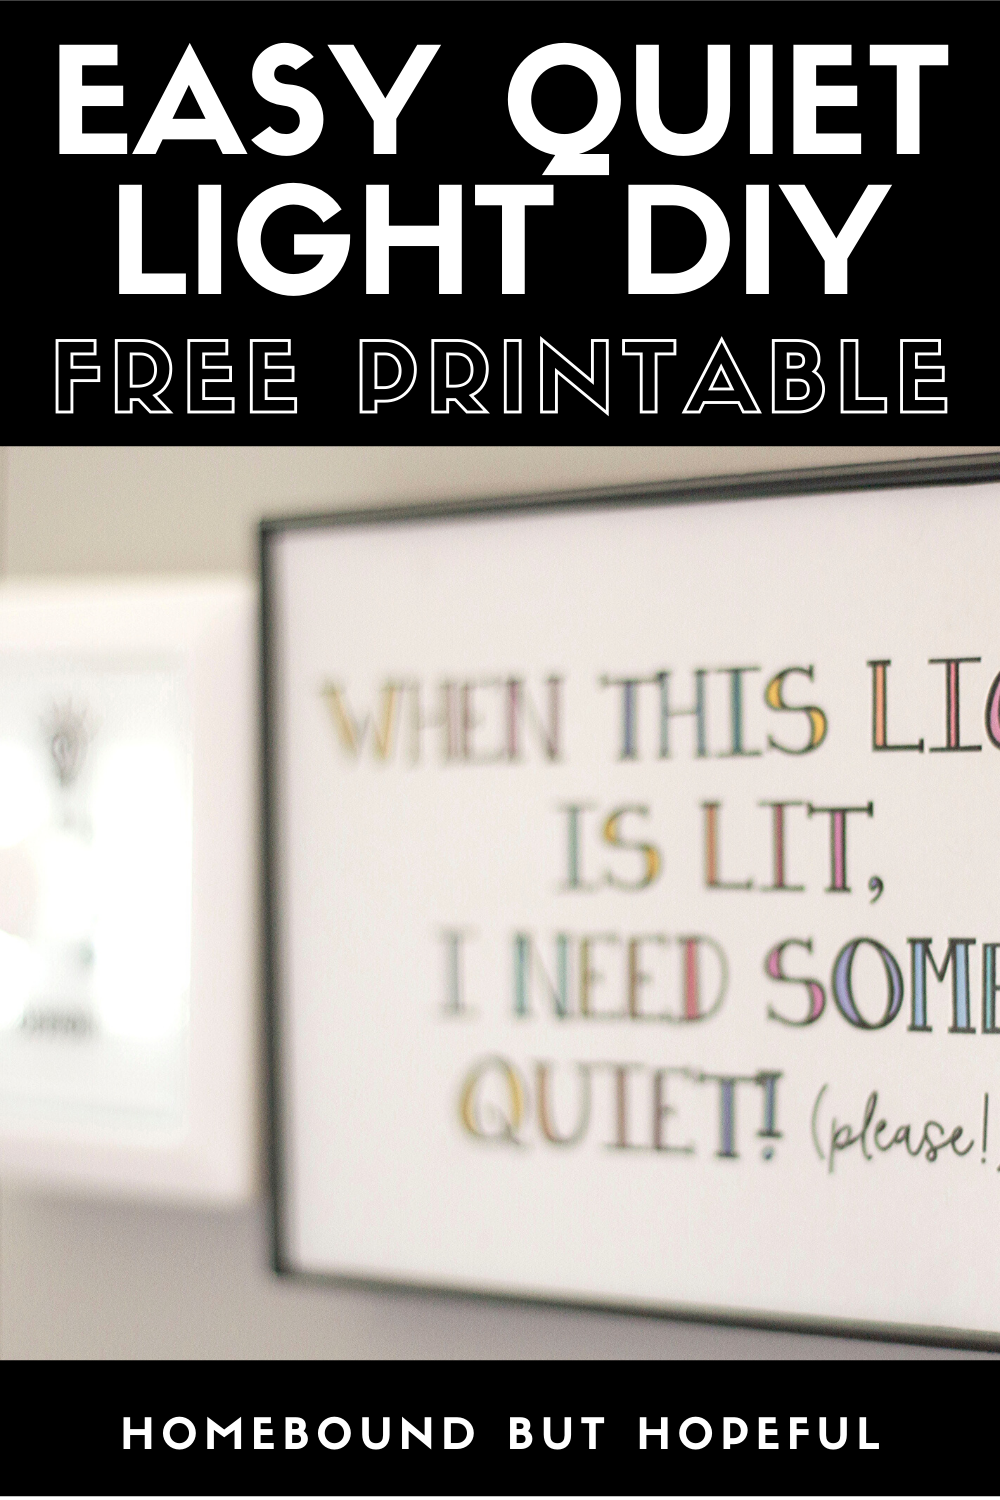 Is all the noise from having everyone at home making you a little crazy? Claim some quiet time of your own with this cute and easy Quiet Light DIY Idea, which includes a free printable! #introvert #quarantine #pandemic #workfromhome #workathome #peaceandquiet #freeprintable